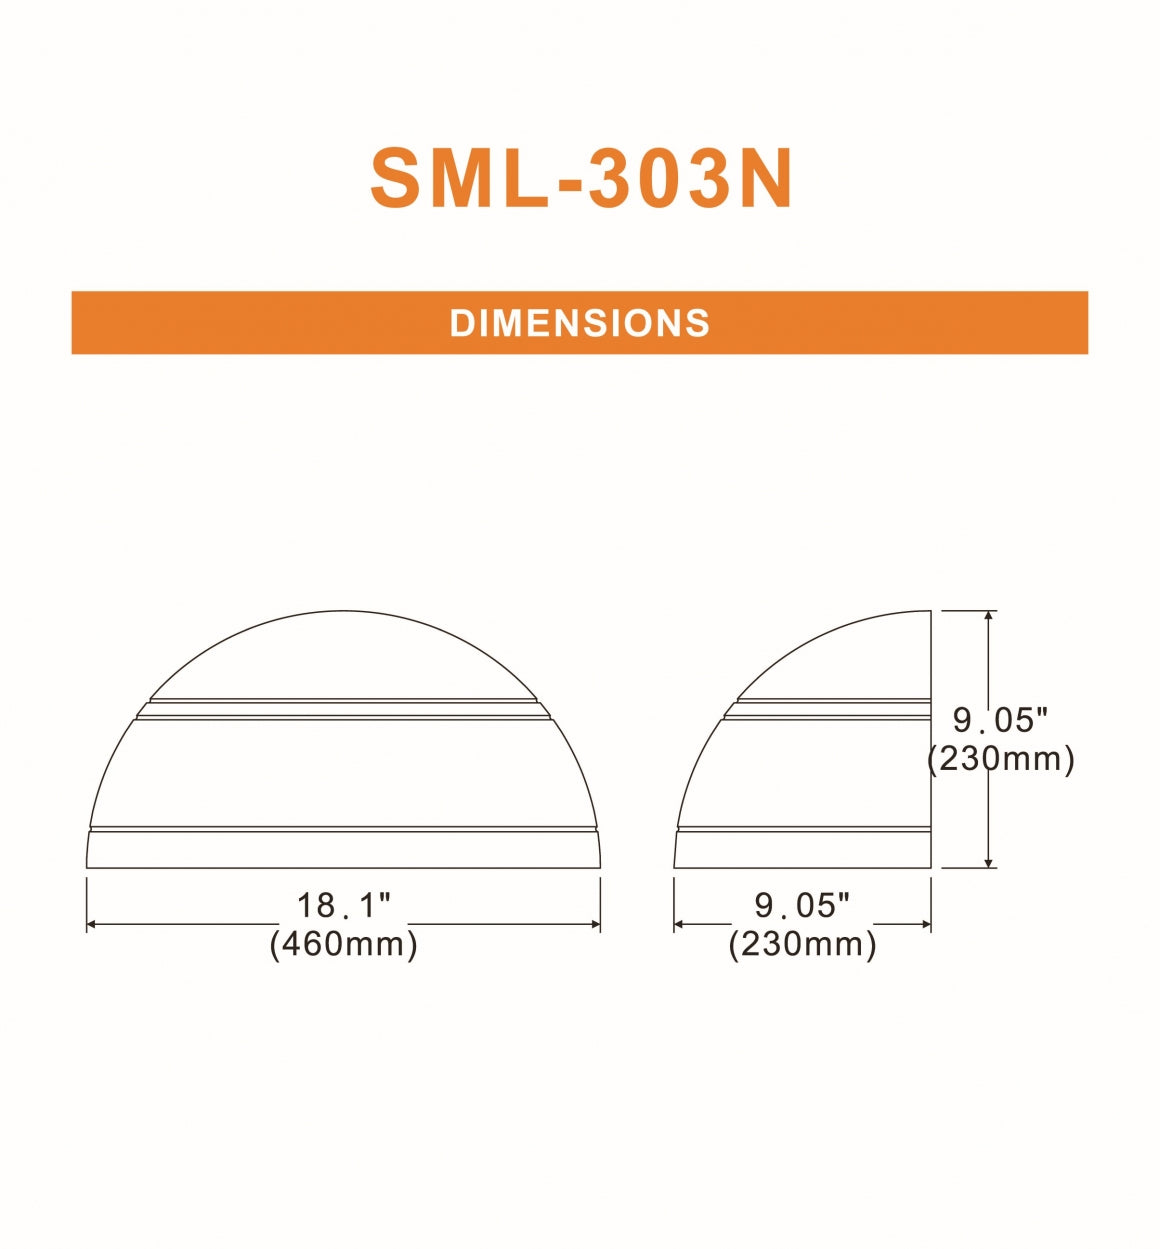 LED Architectural Full Cut Off Wall Pack, 8621 Lumen Max, Wattage 72/50/30/15W and CCT Selectable 3000K/4000K/5000K, 120-277V